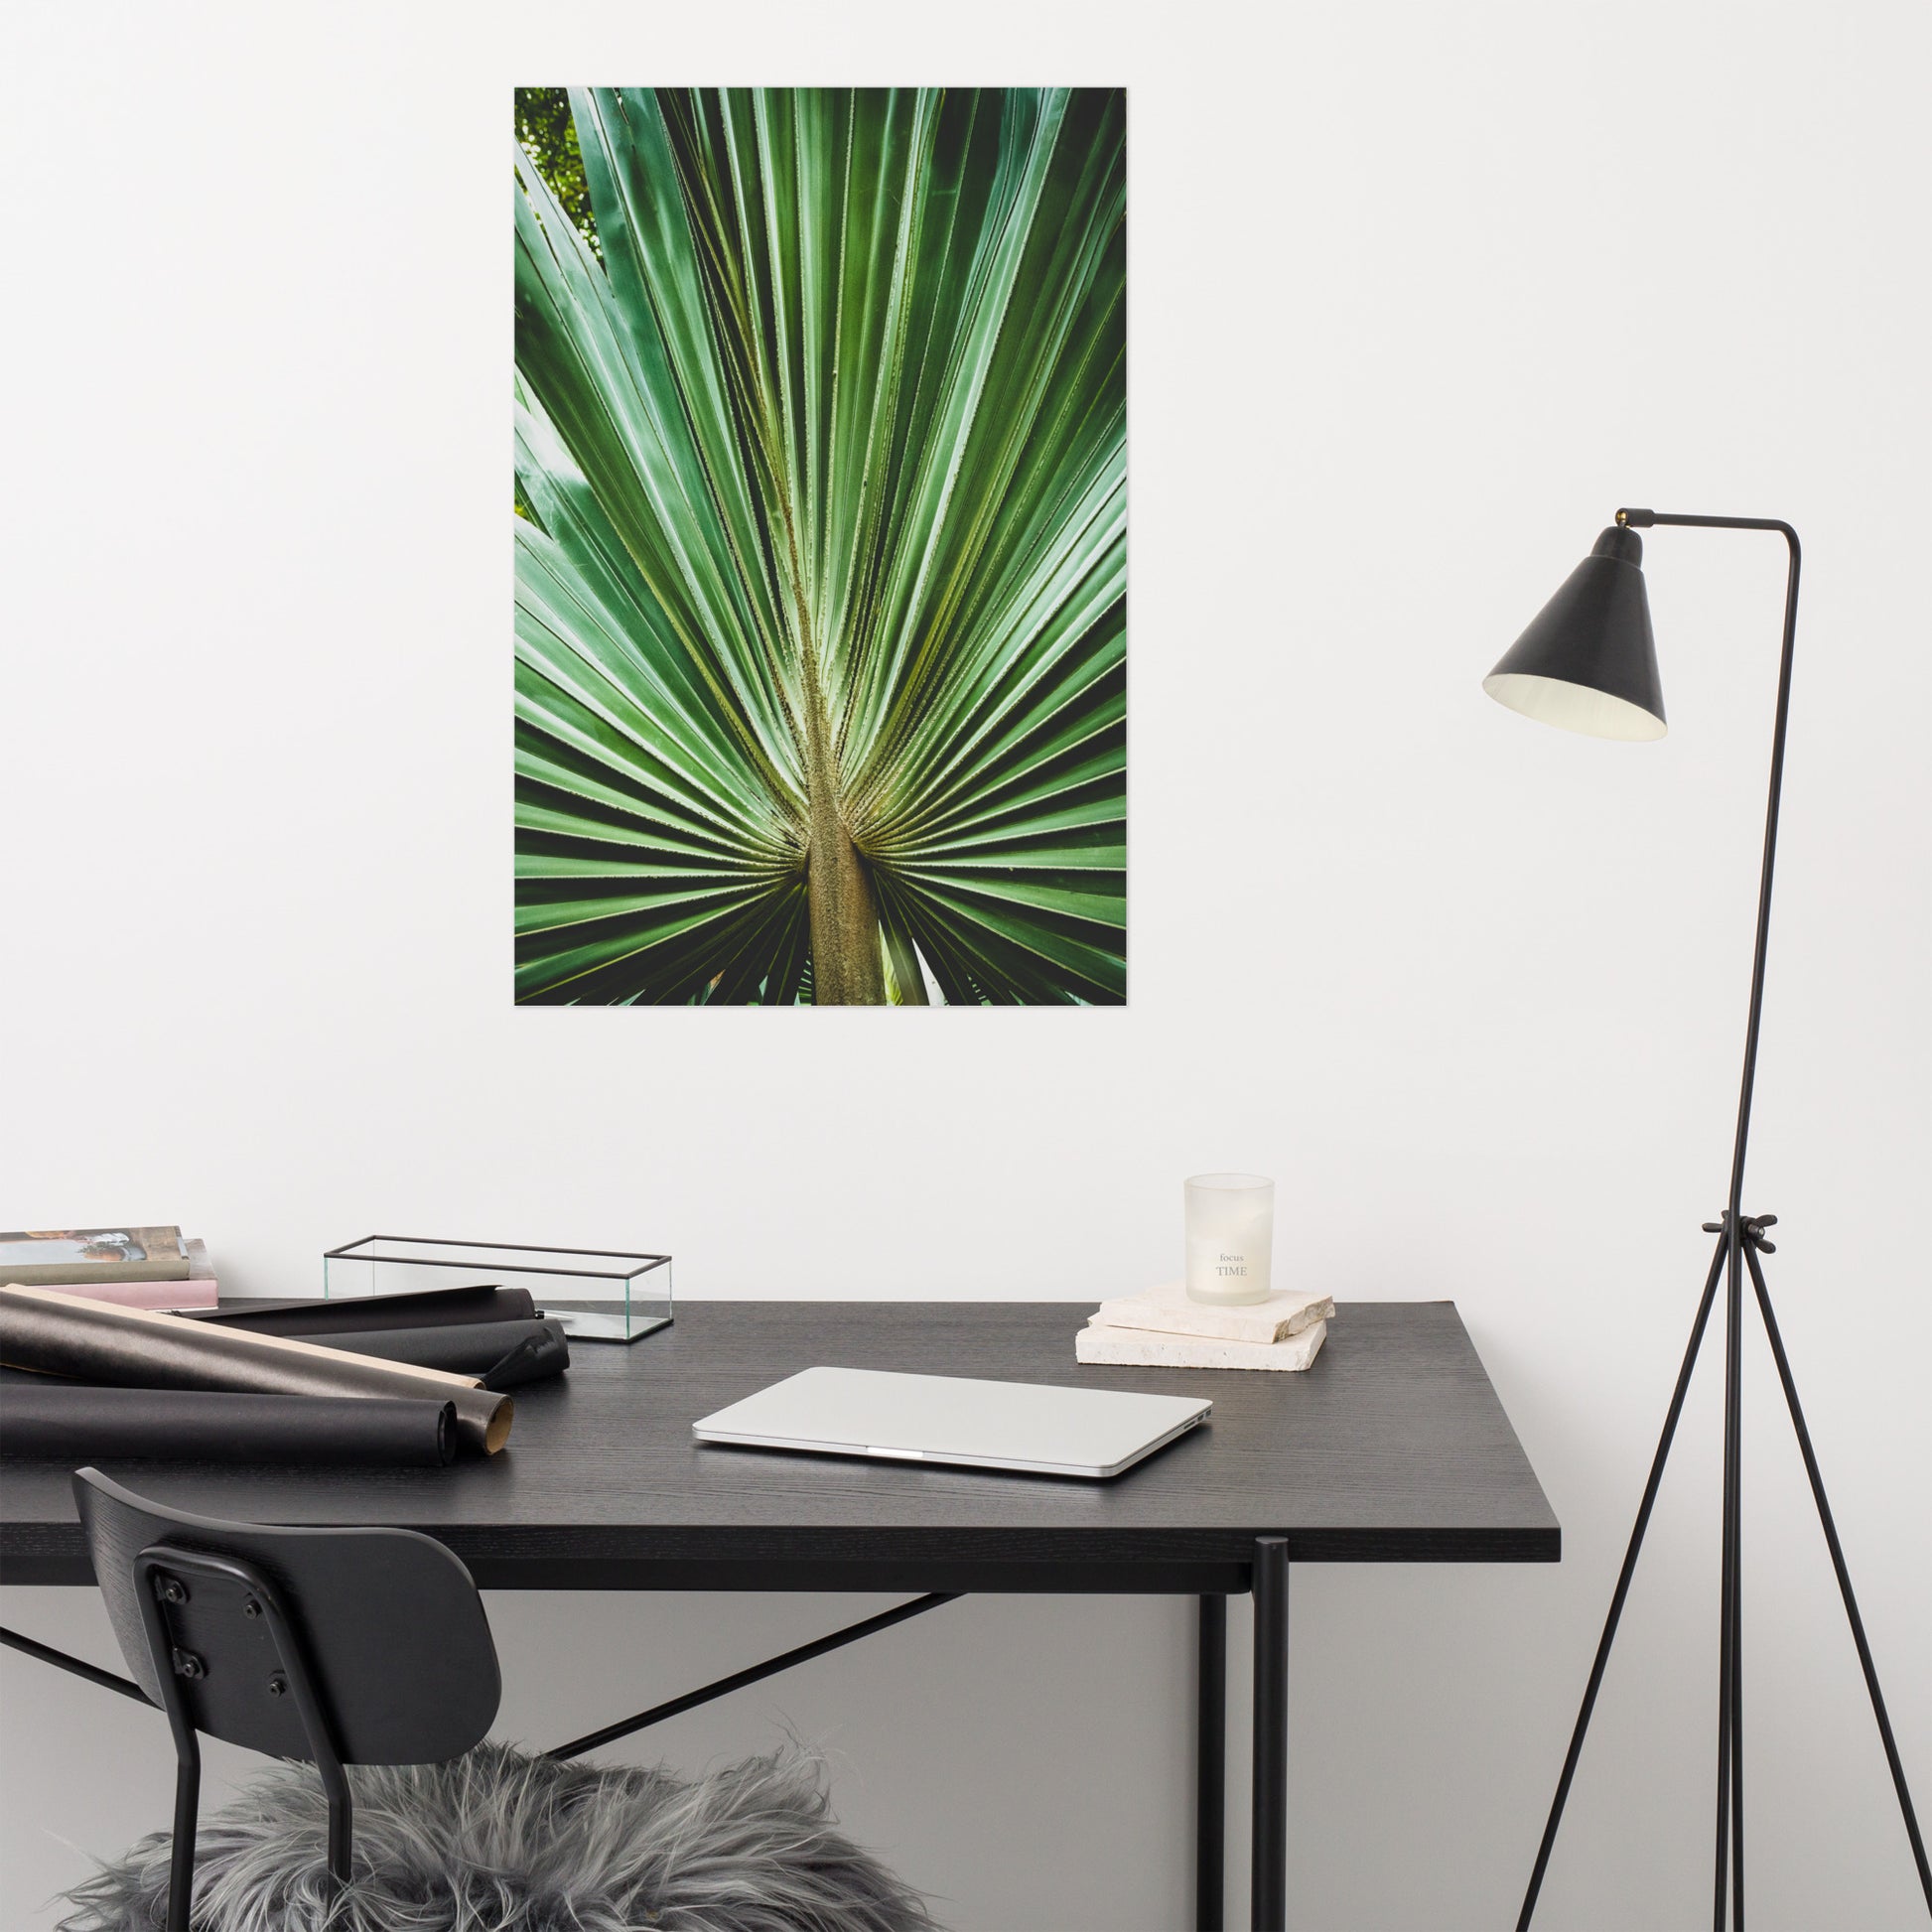 Pediatric Office Wall Art: Aged and Colorized Wide Palm Leaves 2 - Botanical / Plants / Nature Photograph Loose / Unframed Wall Art Print - Artwork